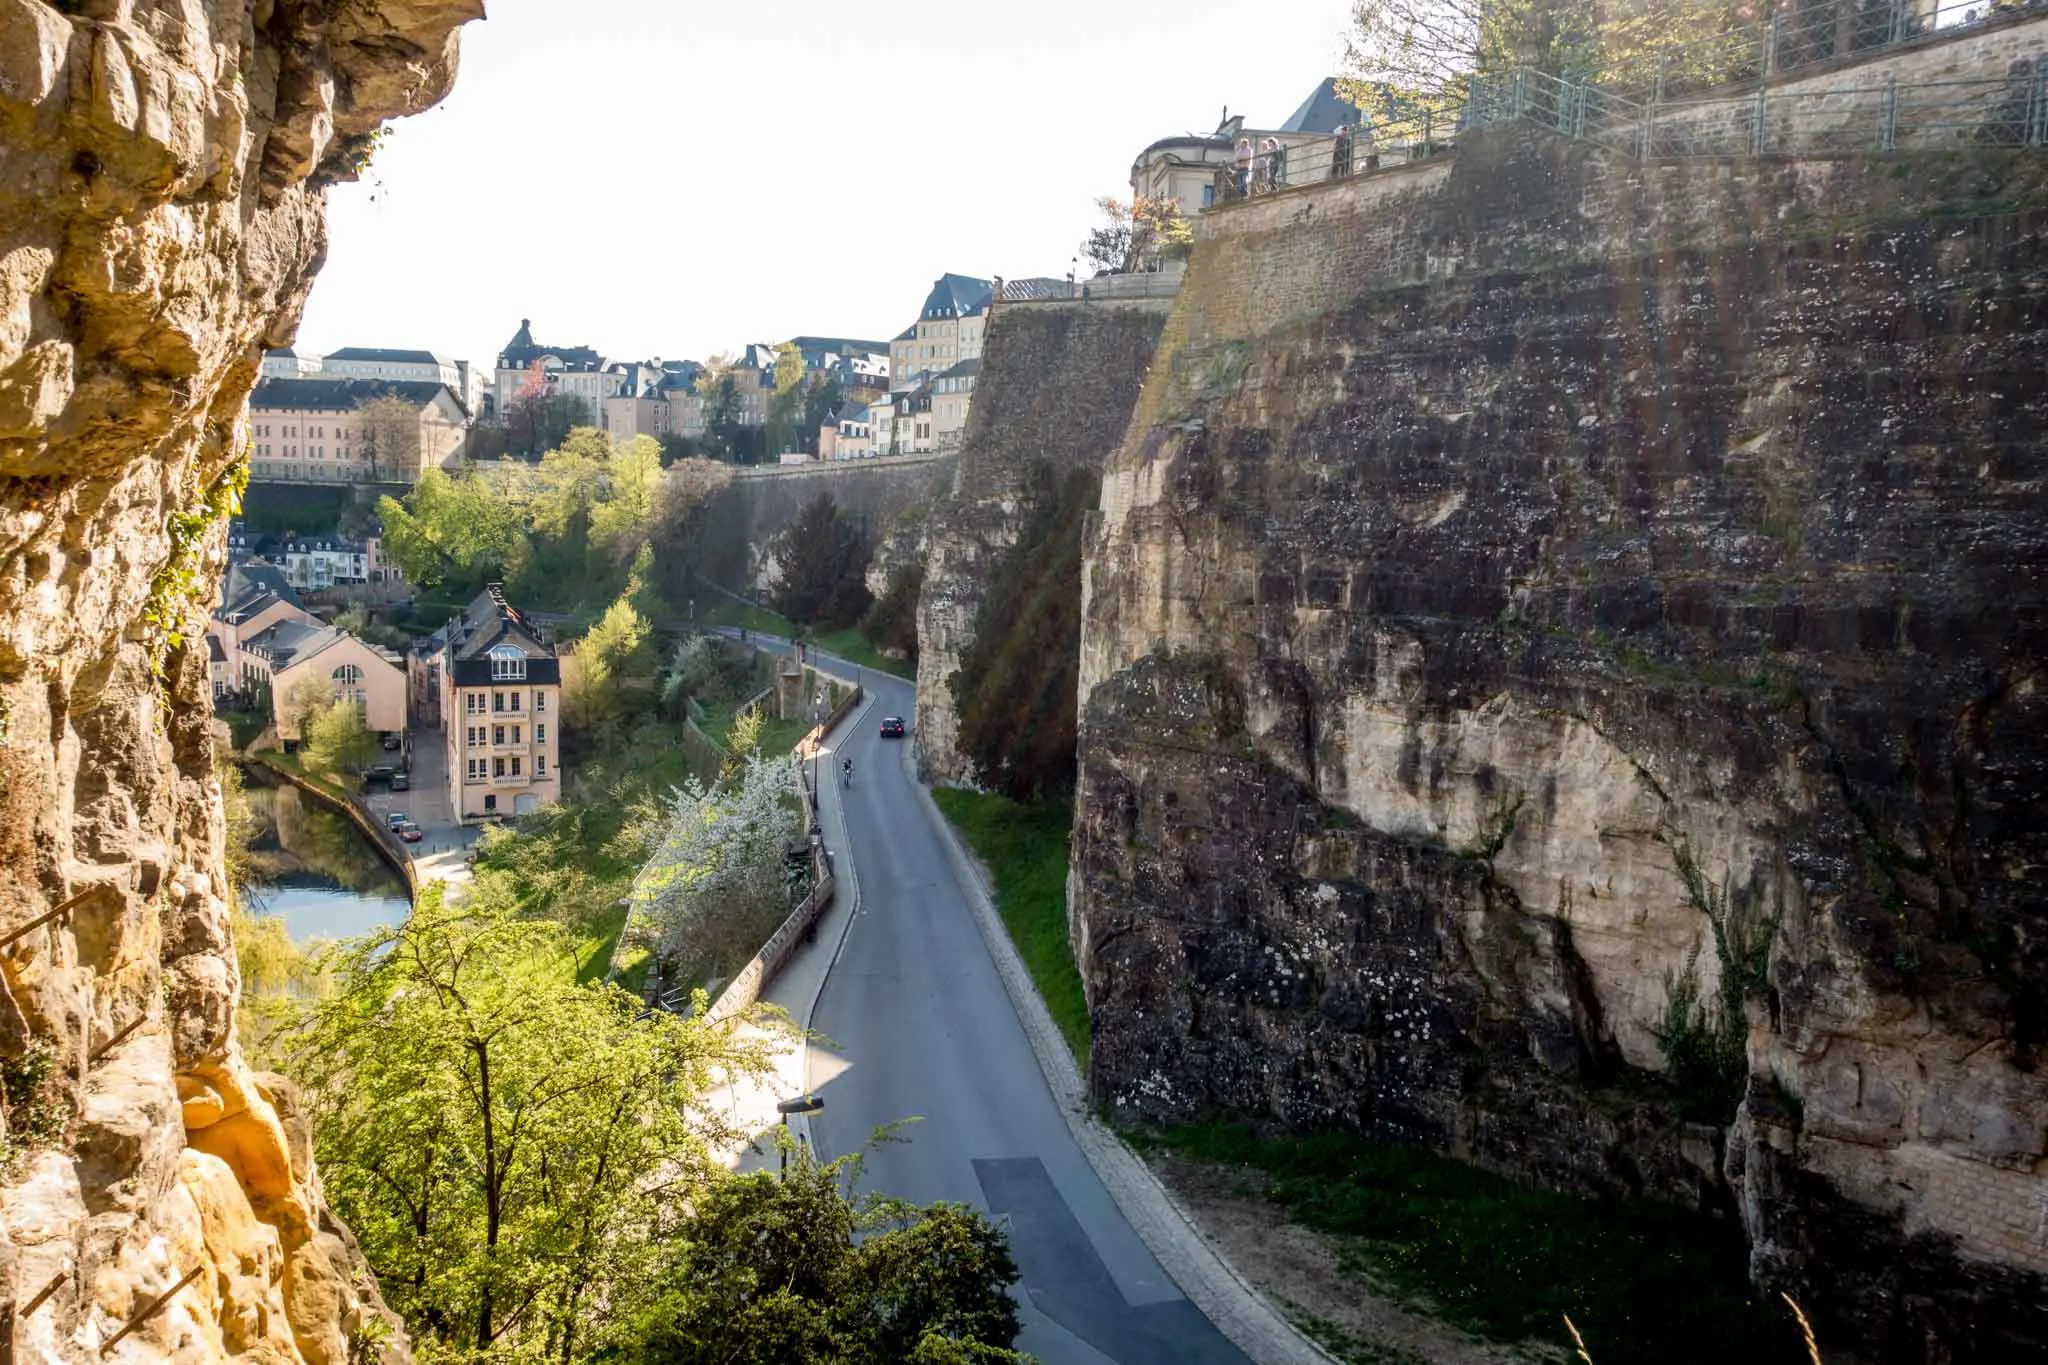 View of road between upper and lower parts of Luxembourg City.